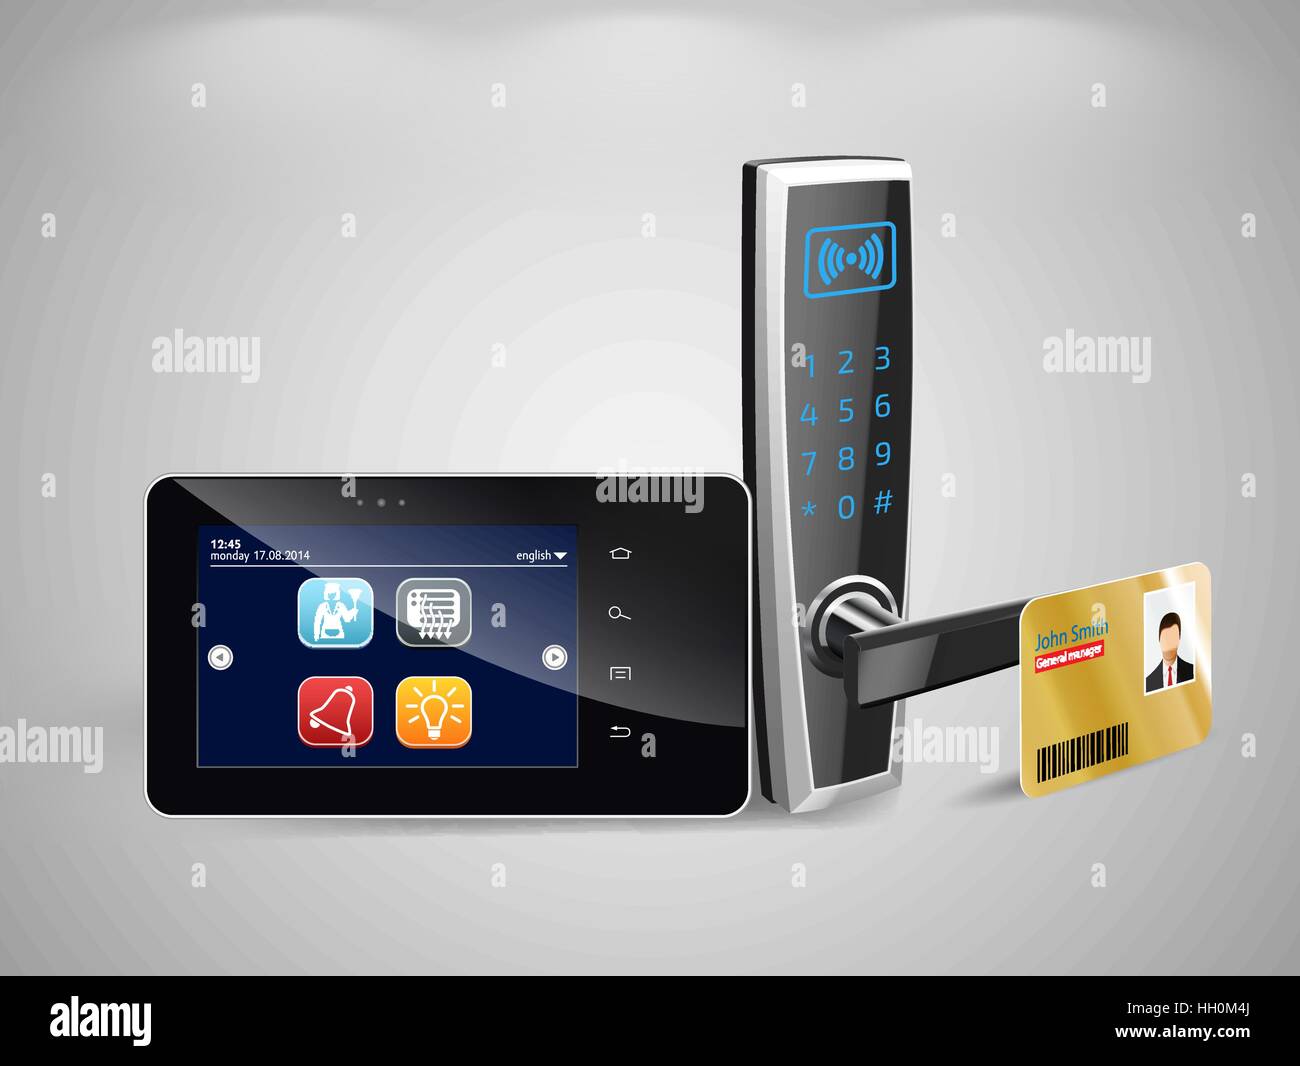 Hotel access control and management system Stock Vector